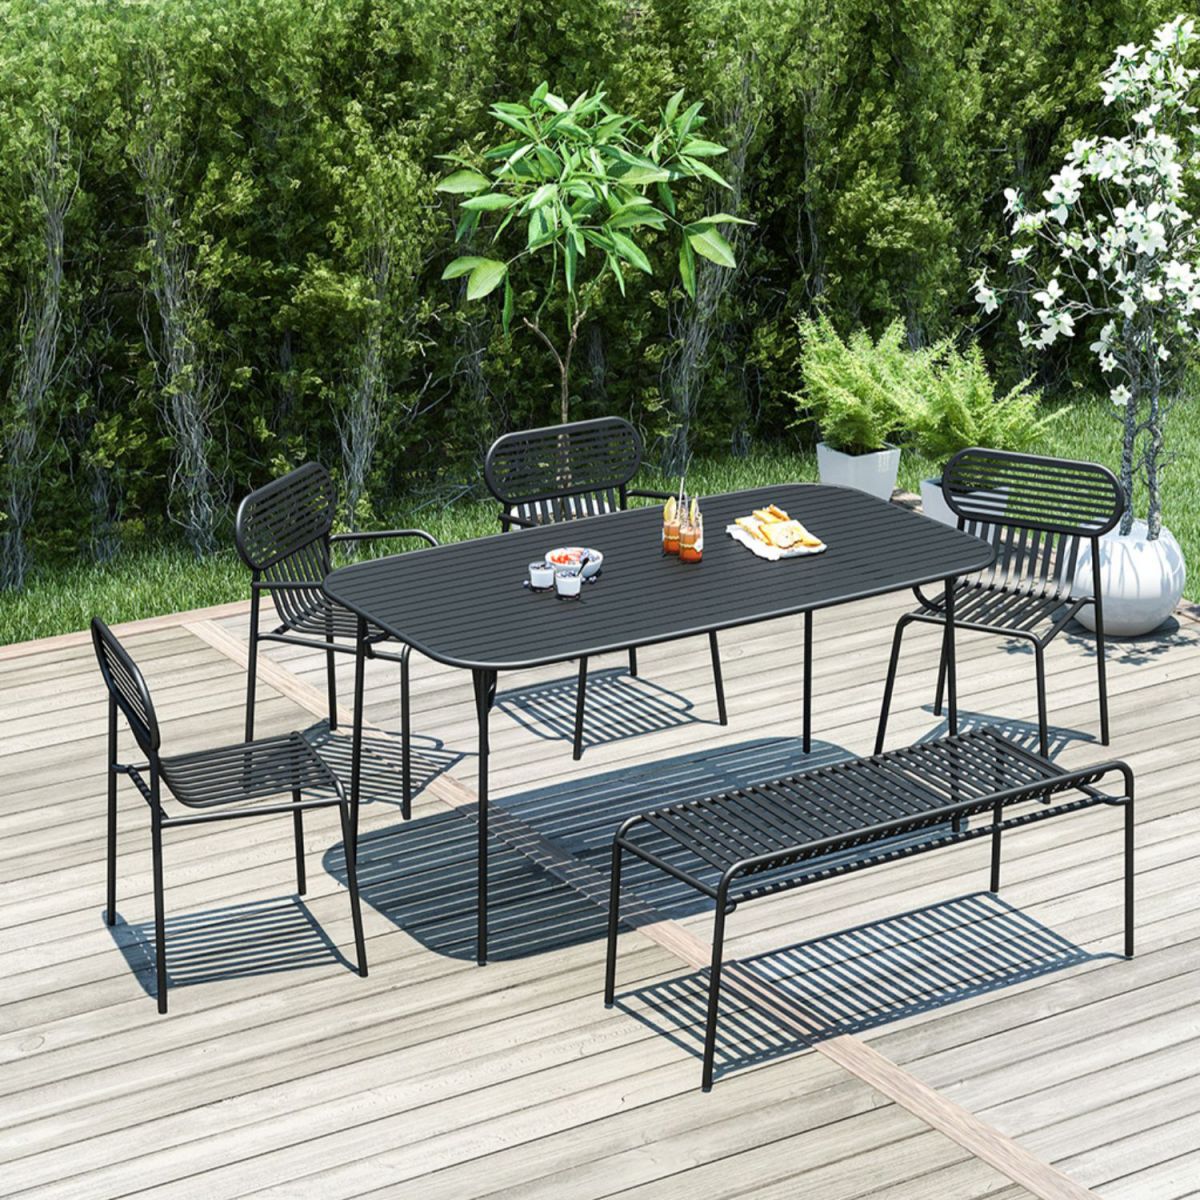 Rust - Resistant Metal Dining Table Rectangle Industrial Style Dining Table